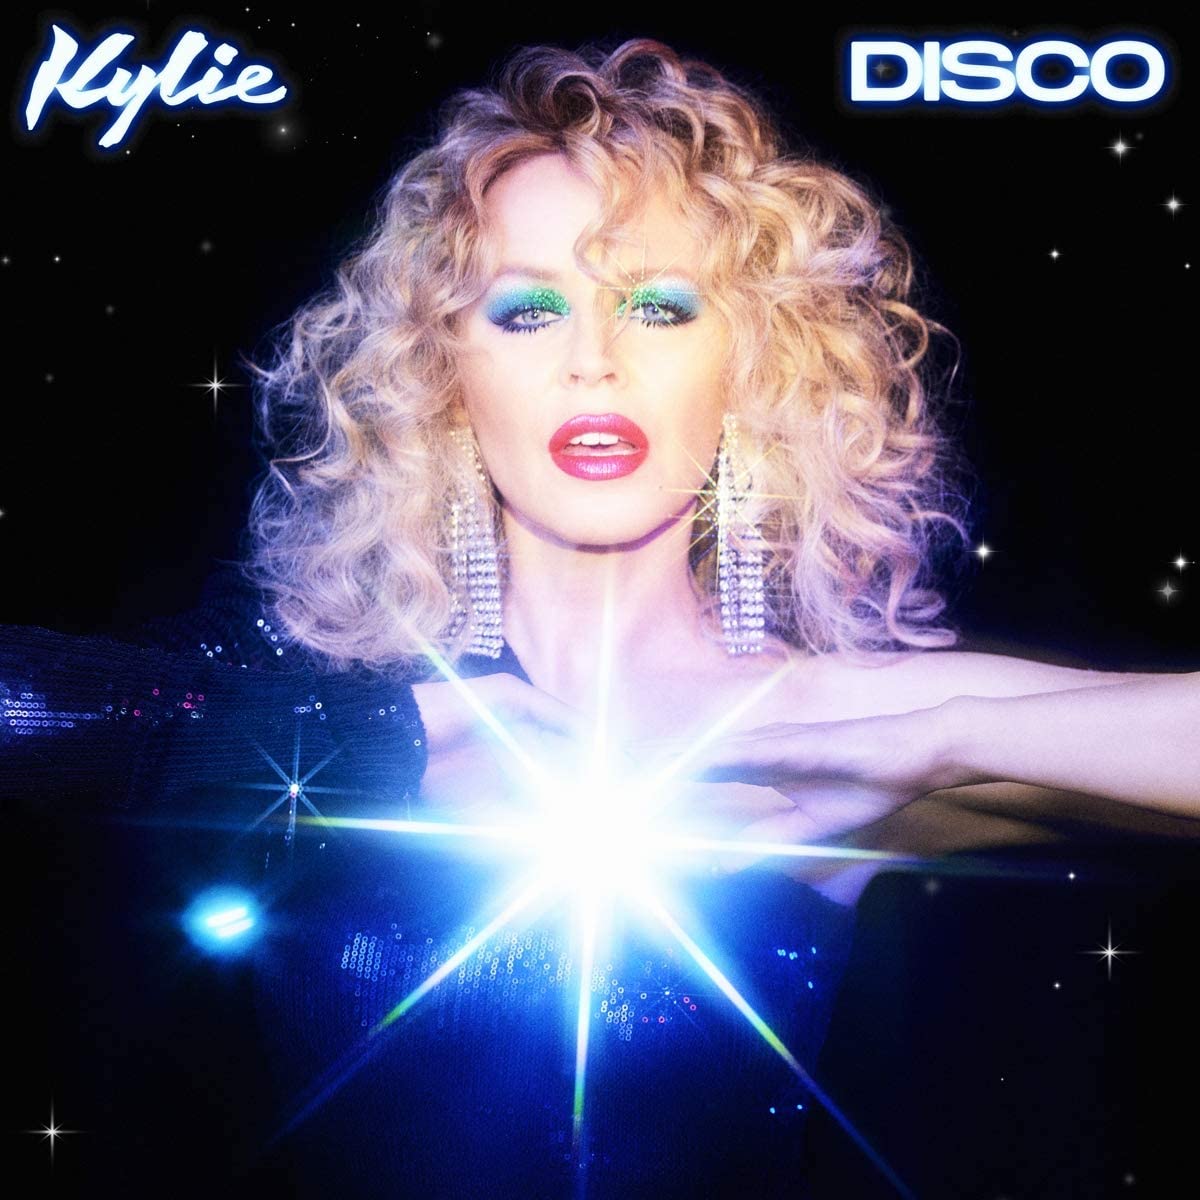 2. Disco - Kylie Minogue.In my opinion, this is Kylie's best album since Aphrodite. There's also not a single bad song here & her Infinite Disco livestream show was groundbreaking too. Best tracks:Miss A ThingSupernovaLast ChanceCelebrate You @kylieminogue